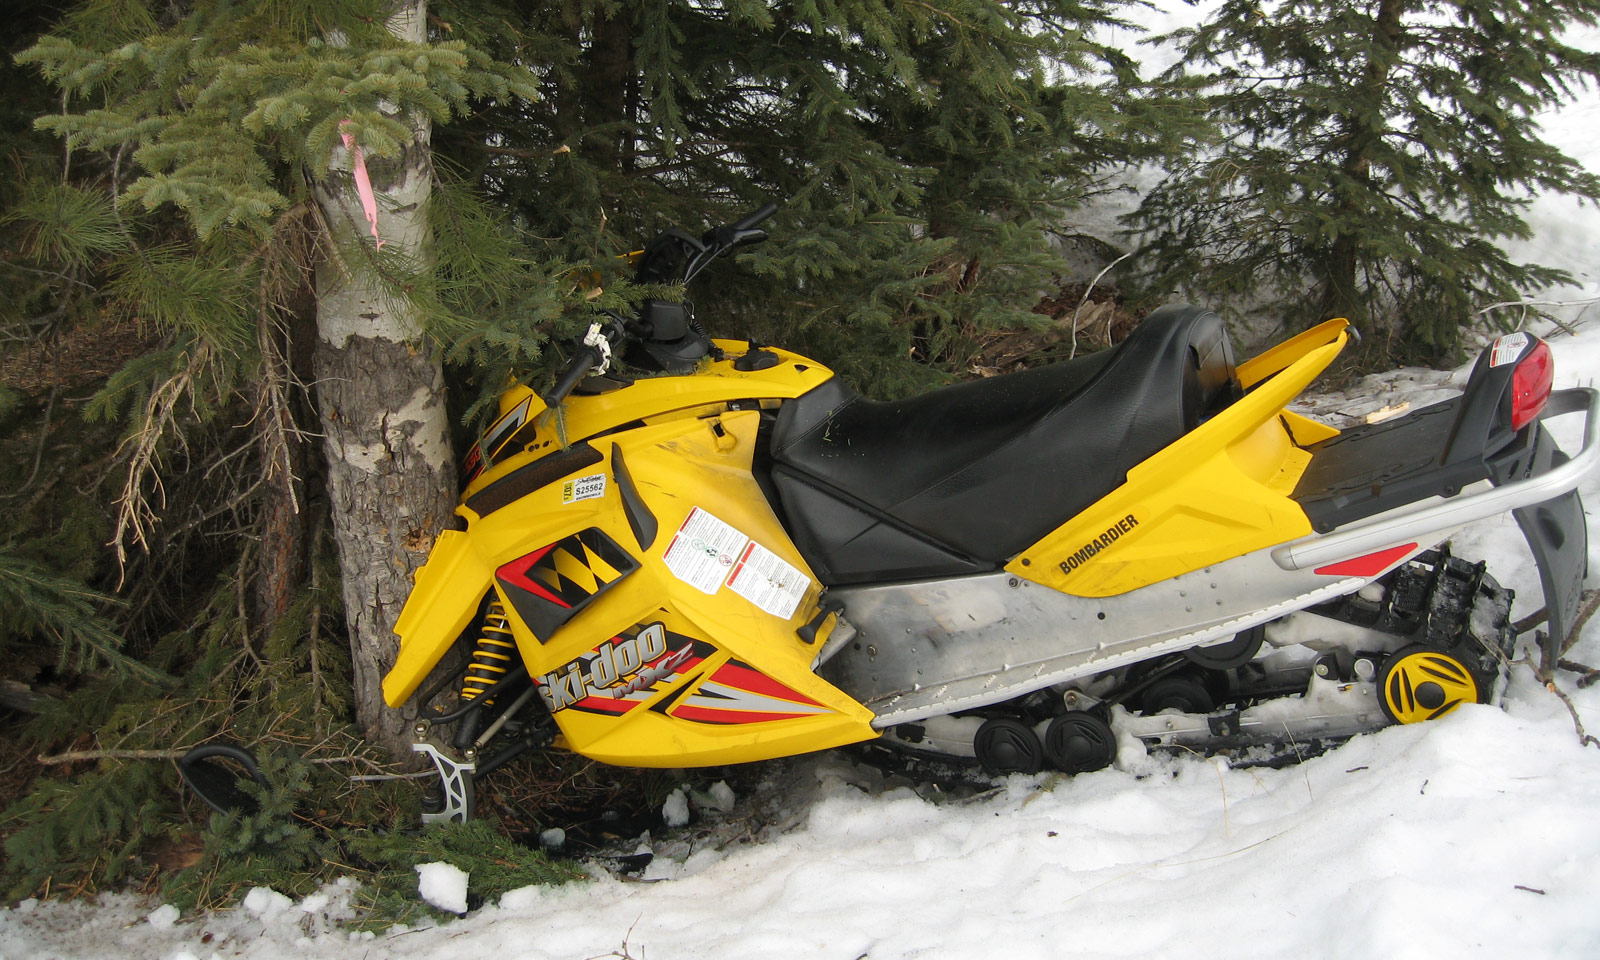 Snowmobile crashed into tree